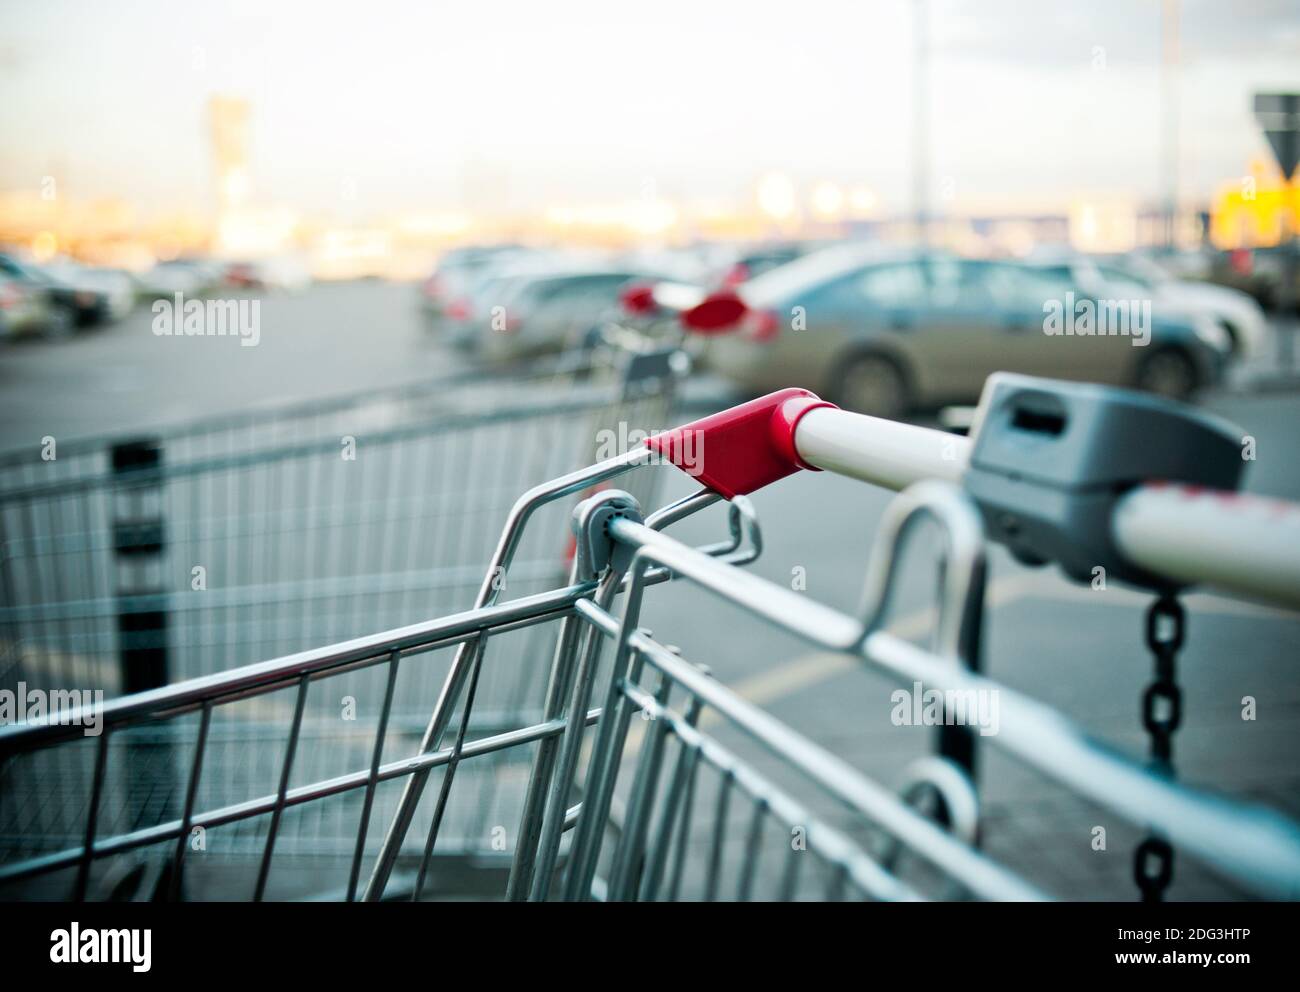 shopping carts near the shopping mall parking outddors Stock Photo